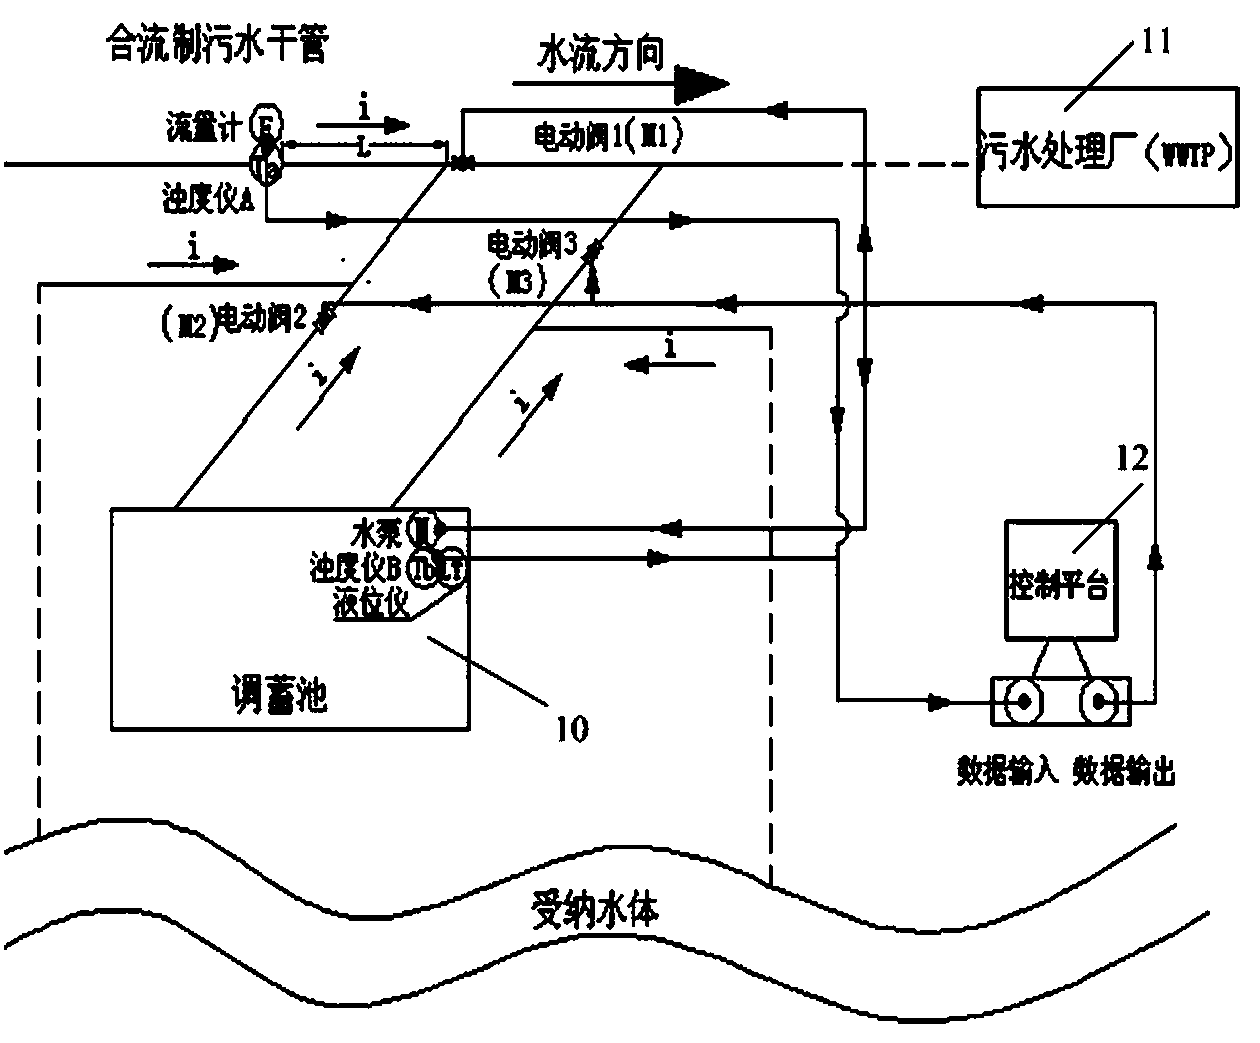 Flow combined system regulating storage tank real-time control system and control method thereof